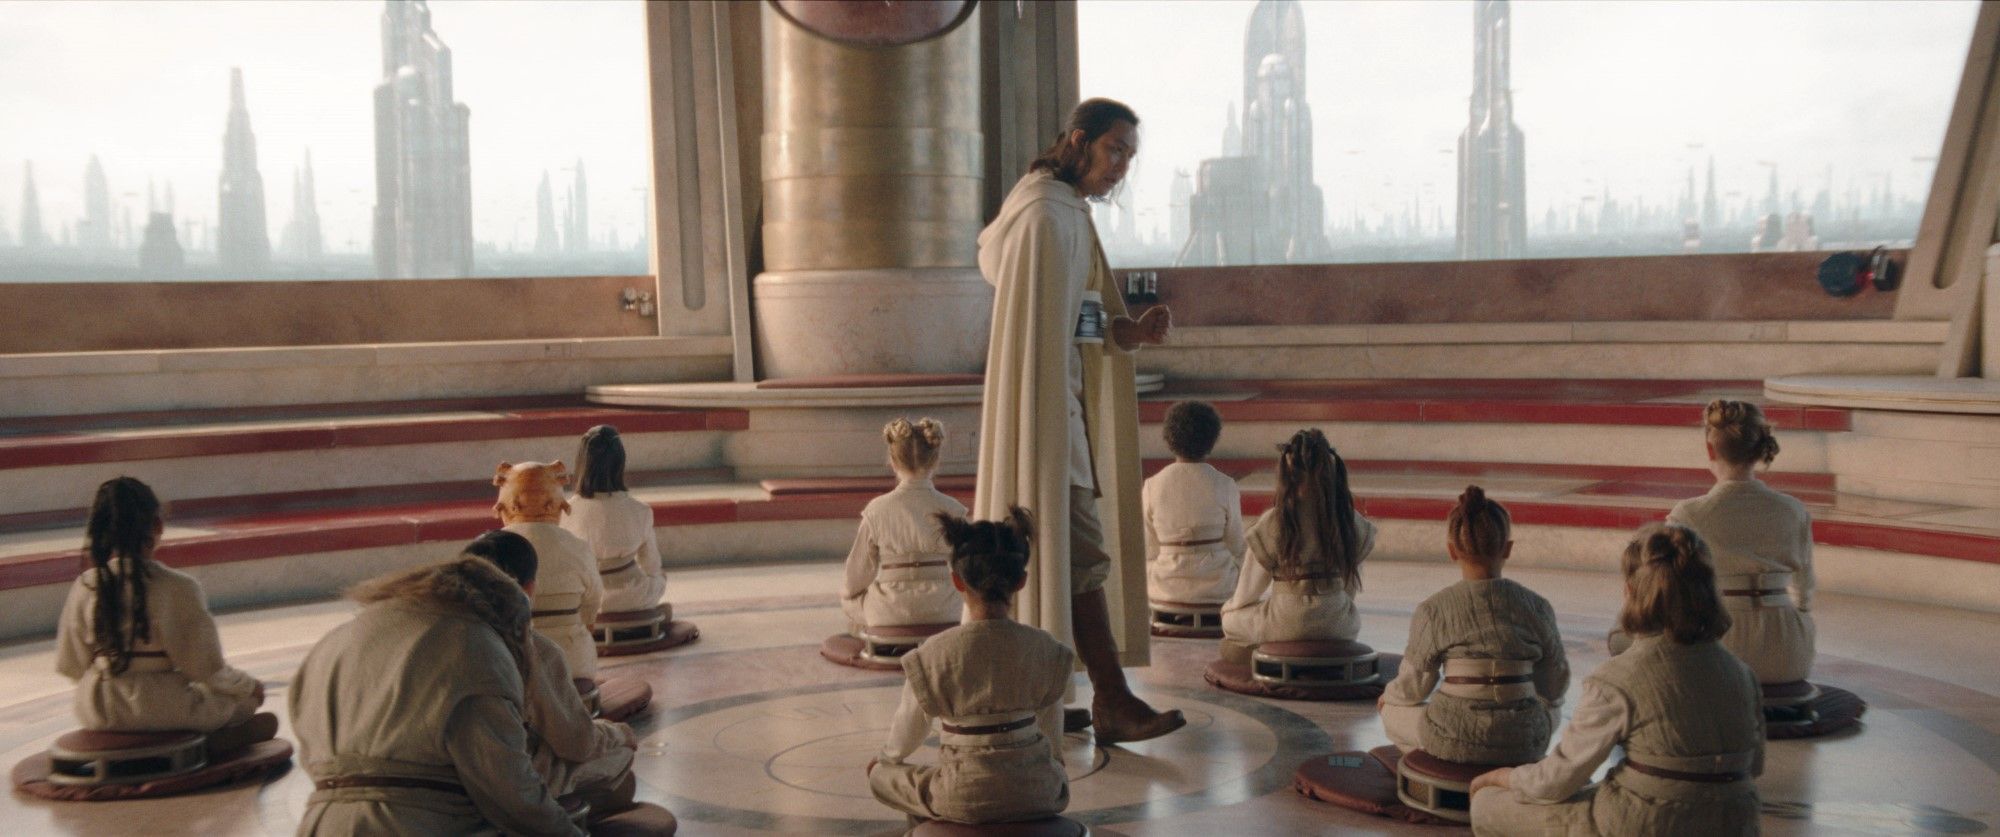 All 28 Official Images For The Acolyte, Star Wars' Phantom Menace Prequel